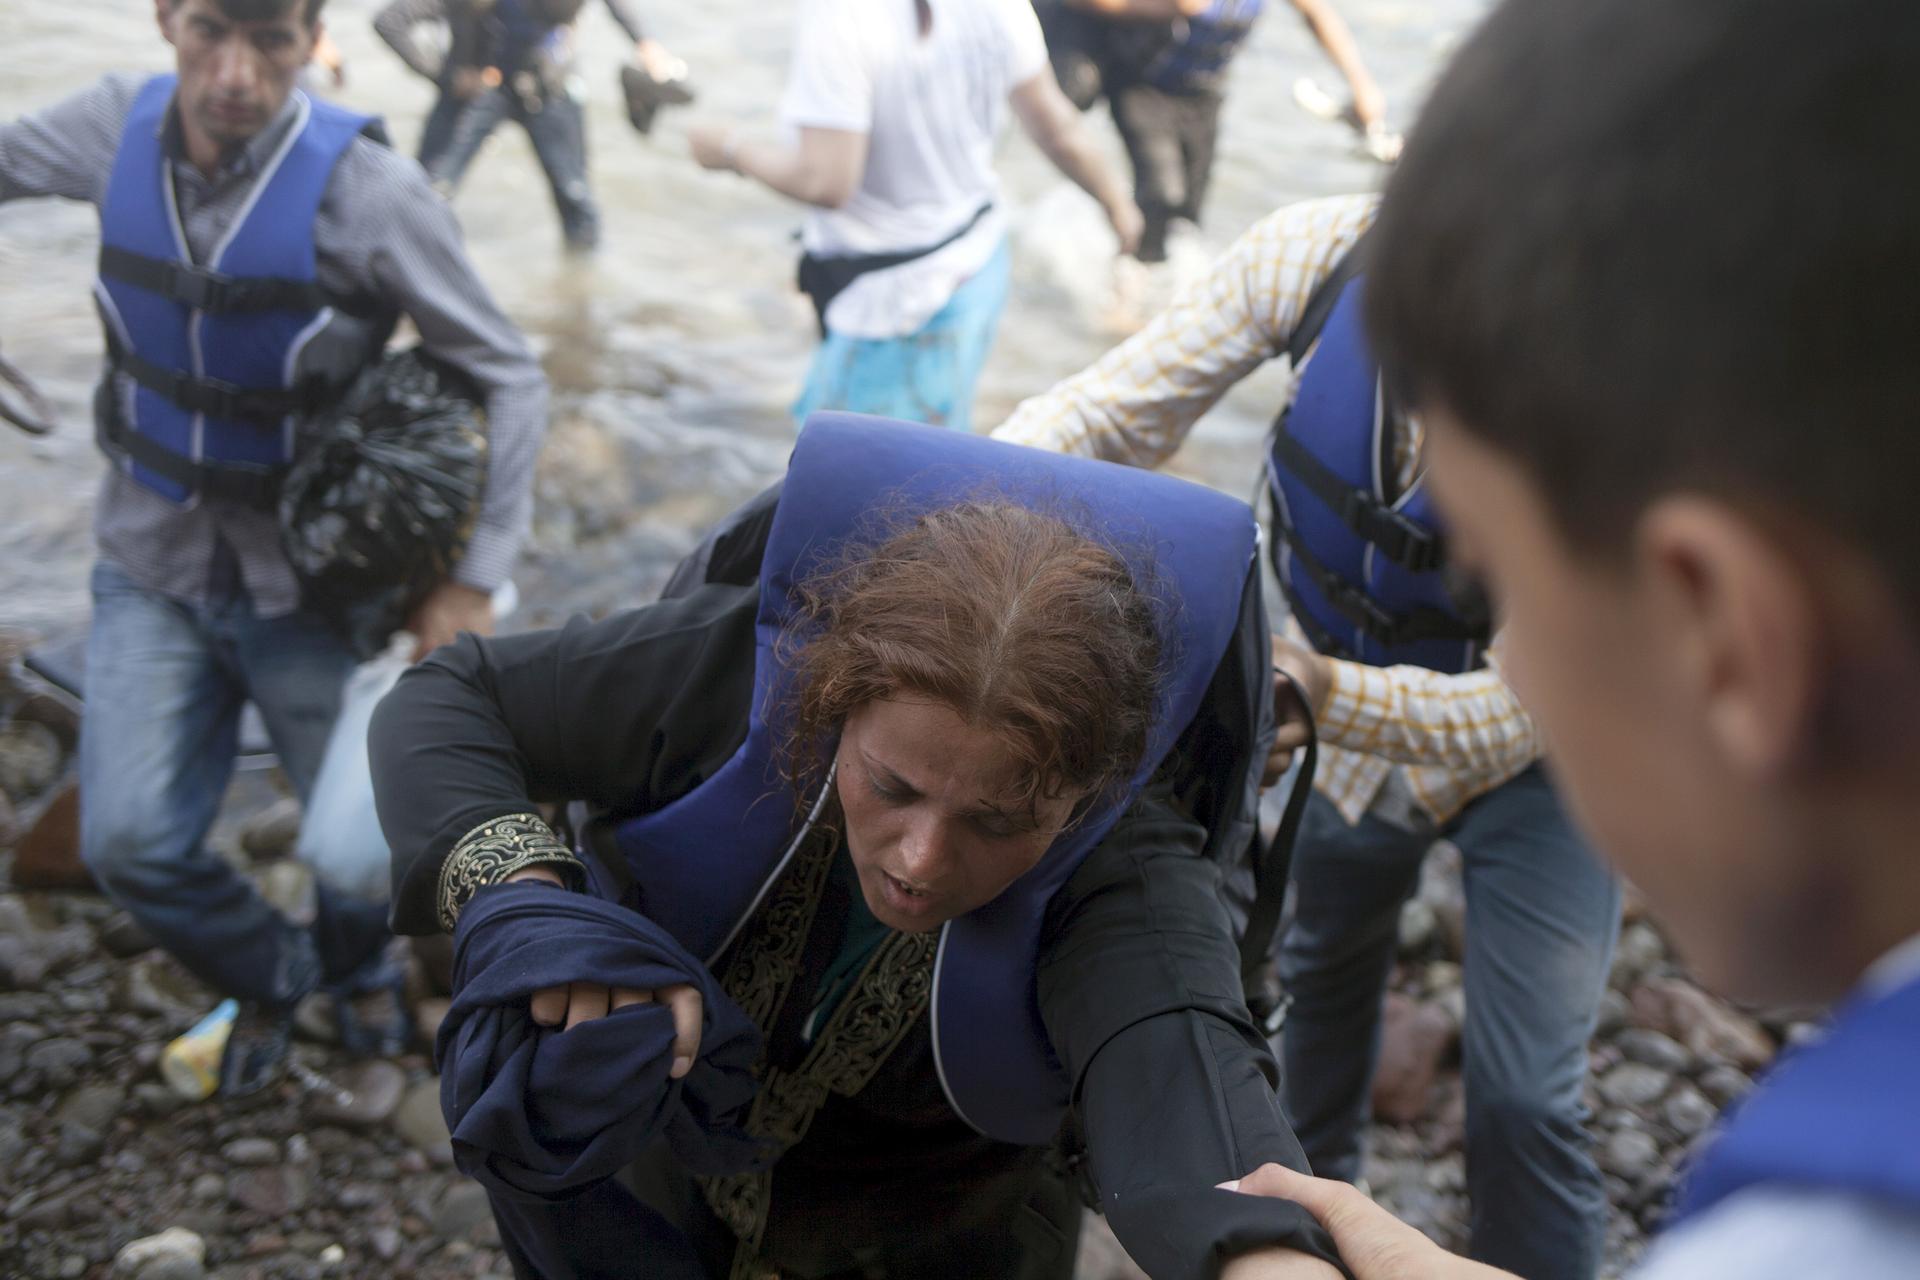 A Syrian refugee is helped moments after arriving on a dinghy on the Greek island of Lesbos September 3, 2015.